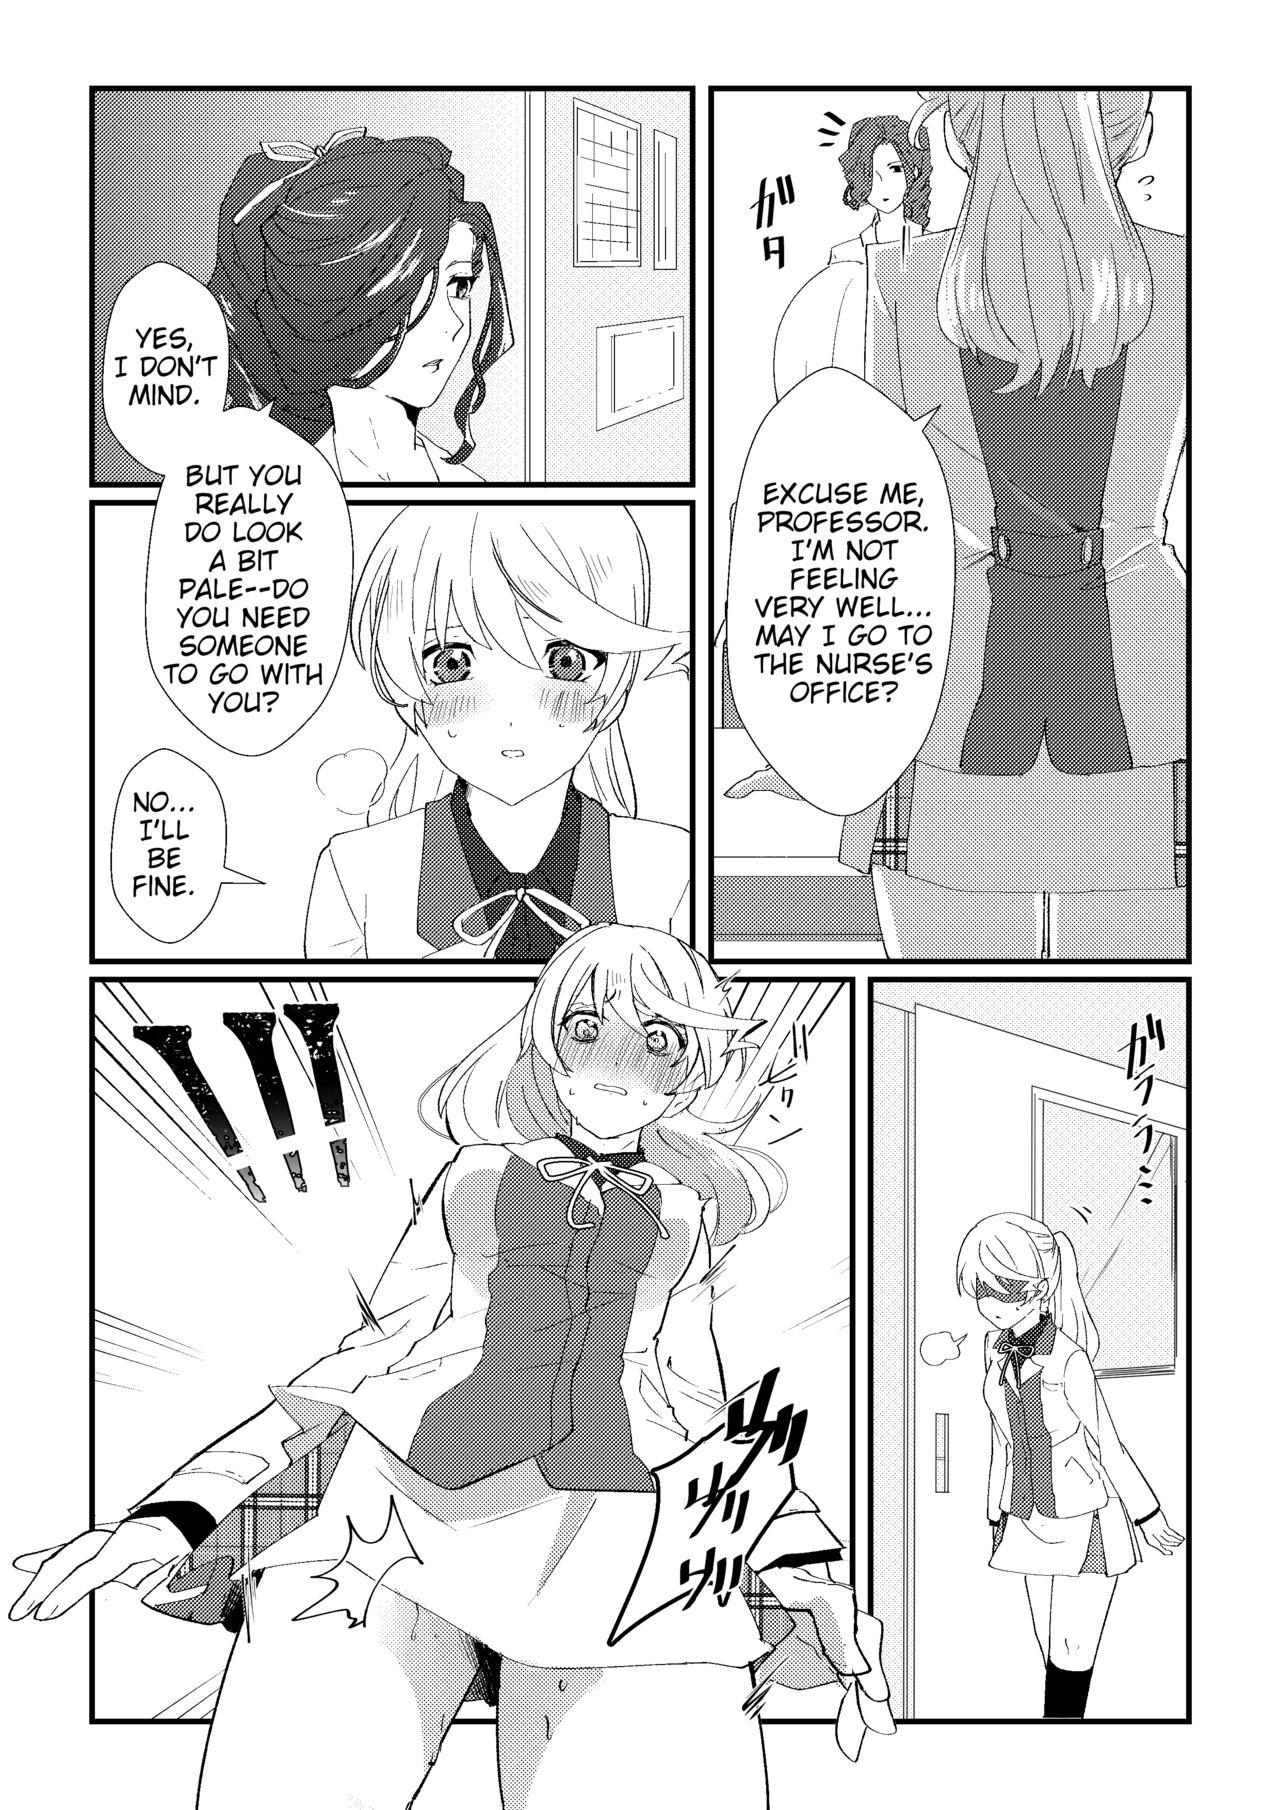 Fist crazy about you - Tales of zestiria Transvestite - Page 3